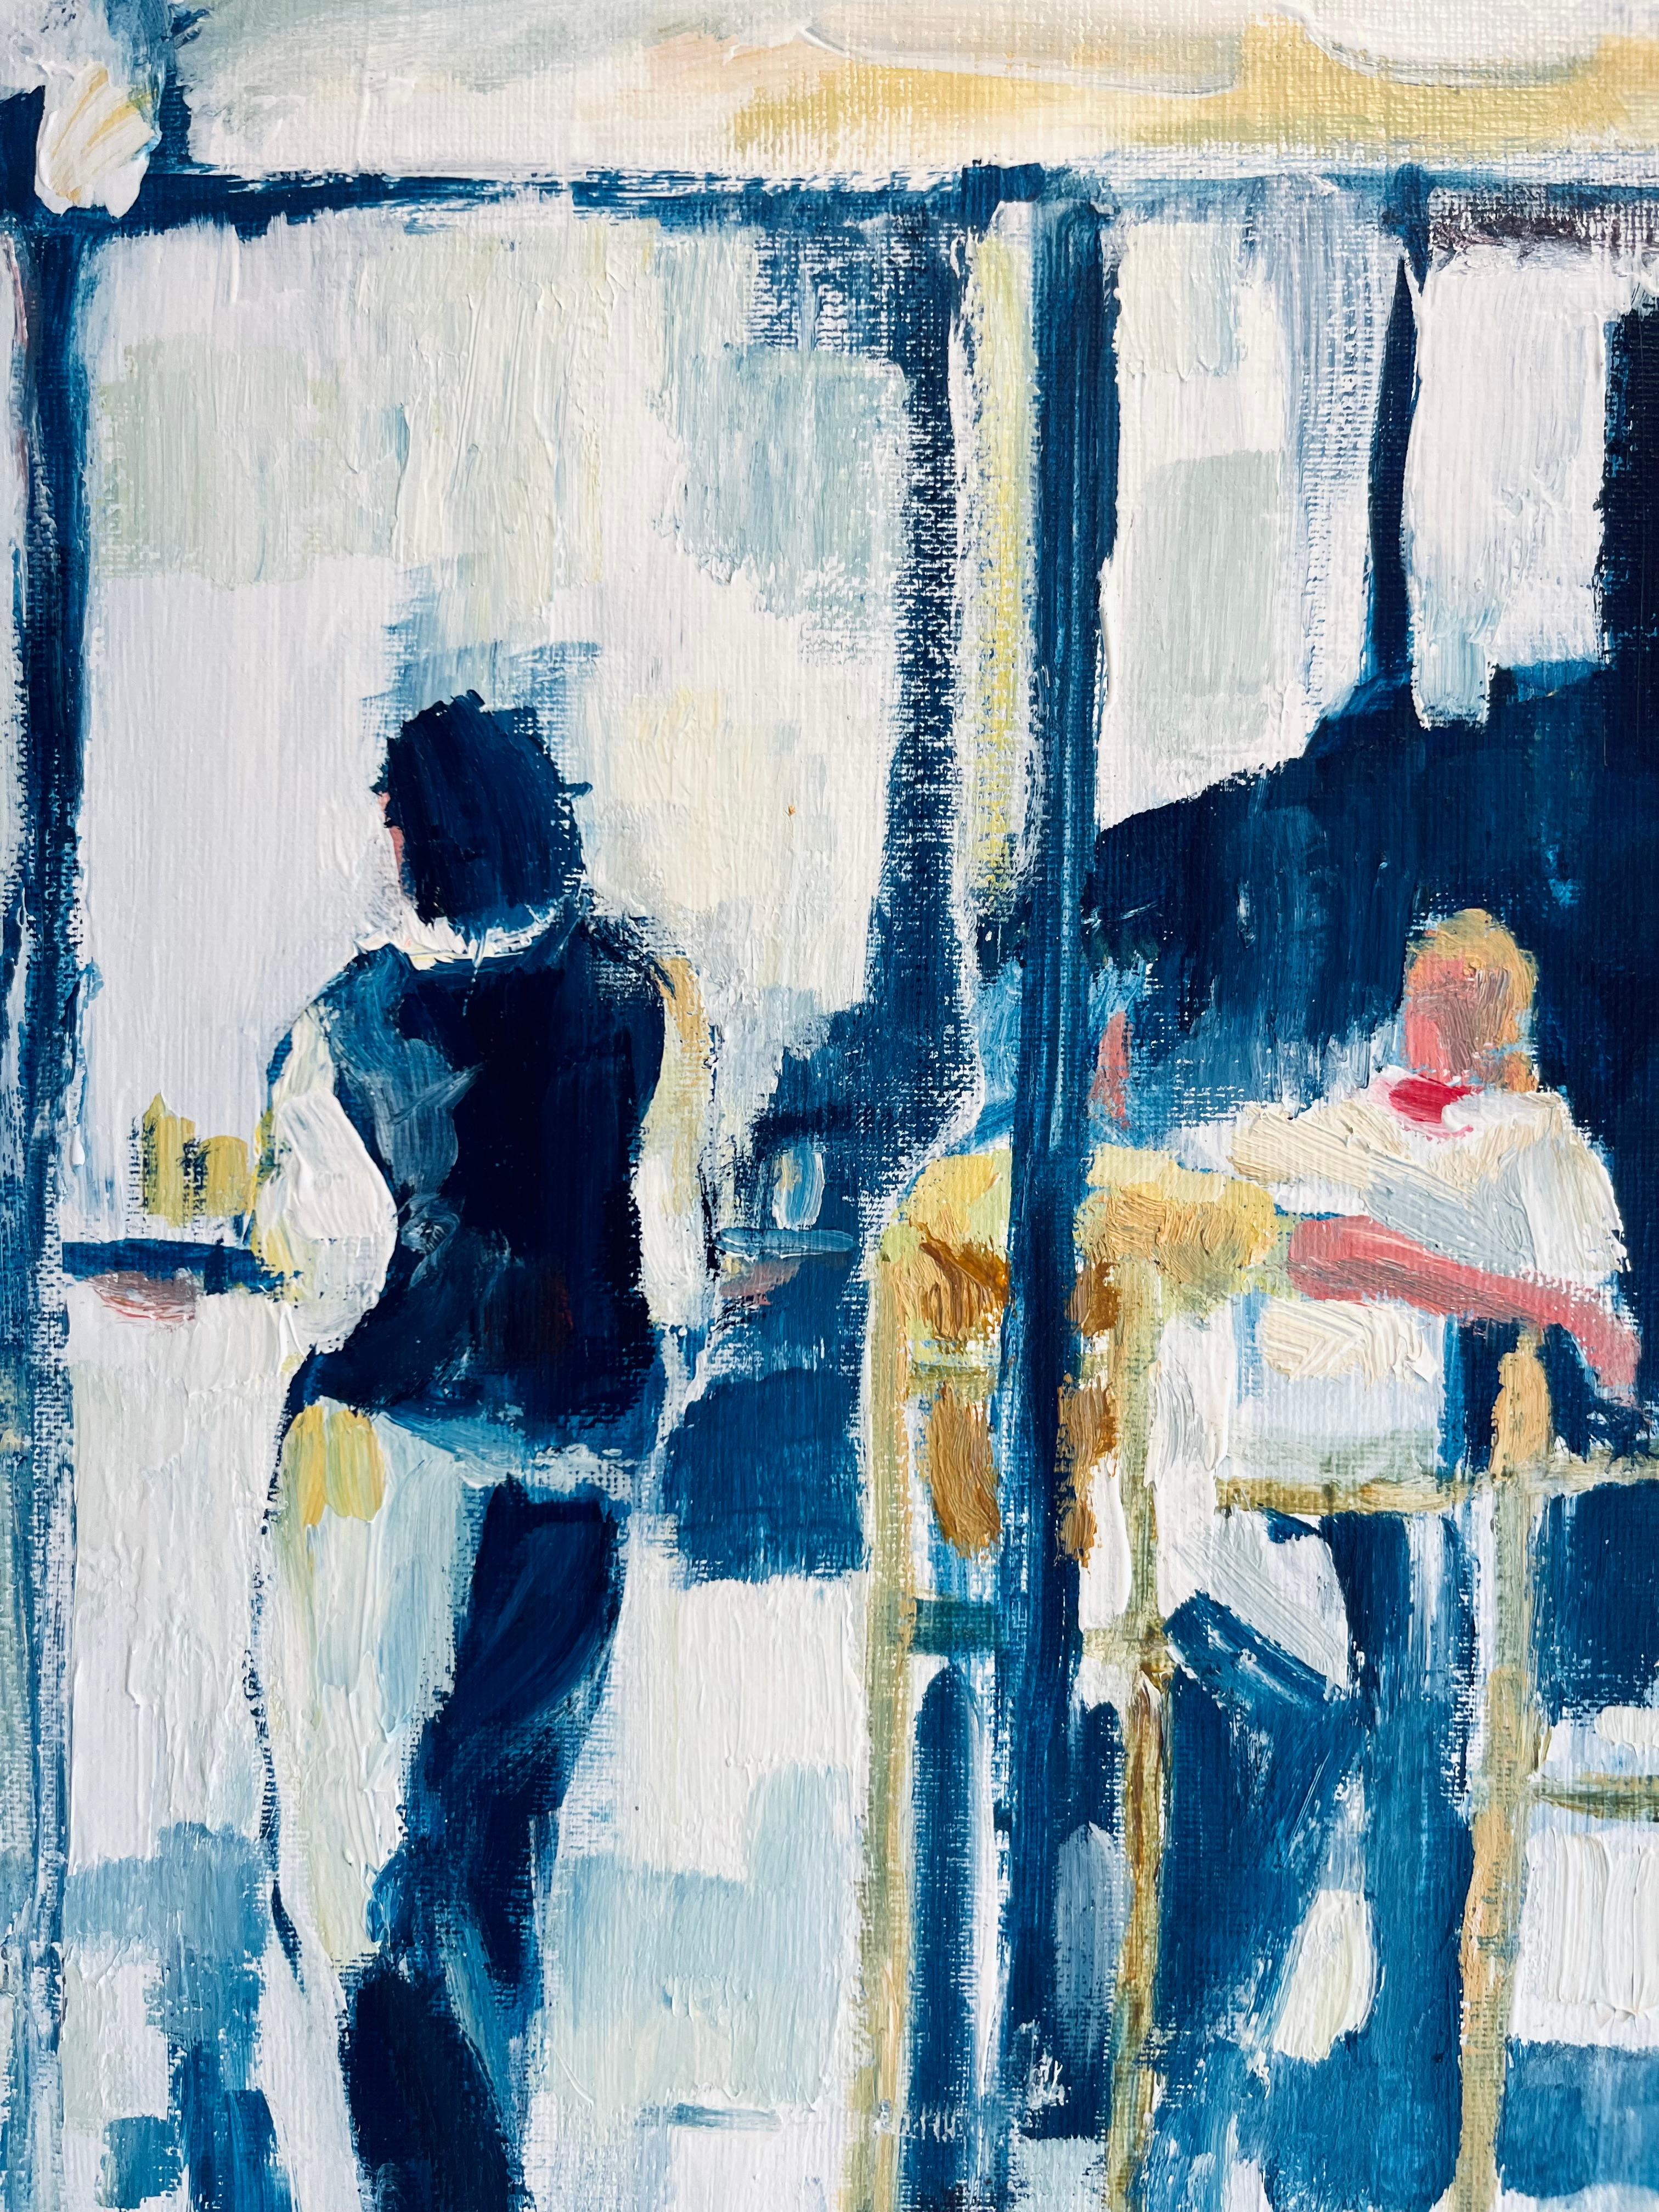 Waiter Cafe Society-Original impressionism figurative cityscape oil painting-Art - Gray Figurative Painting by Richard Gower